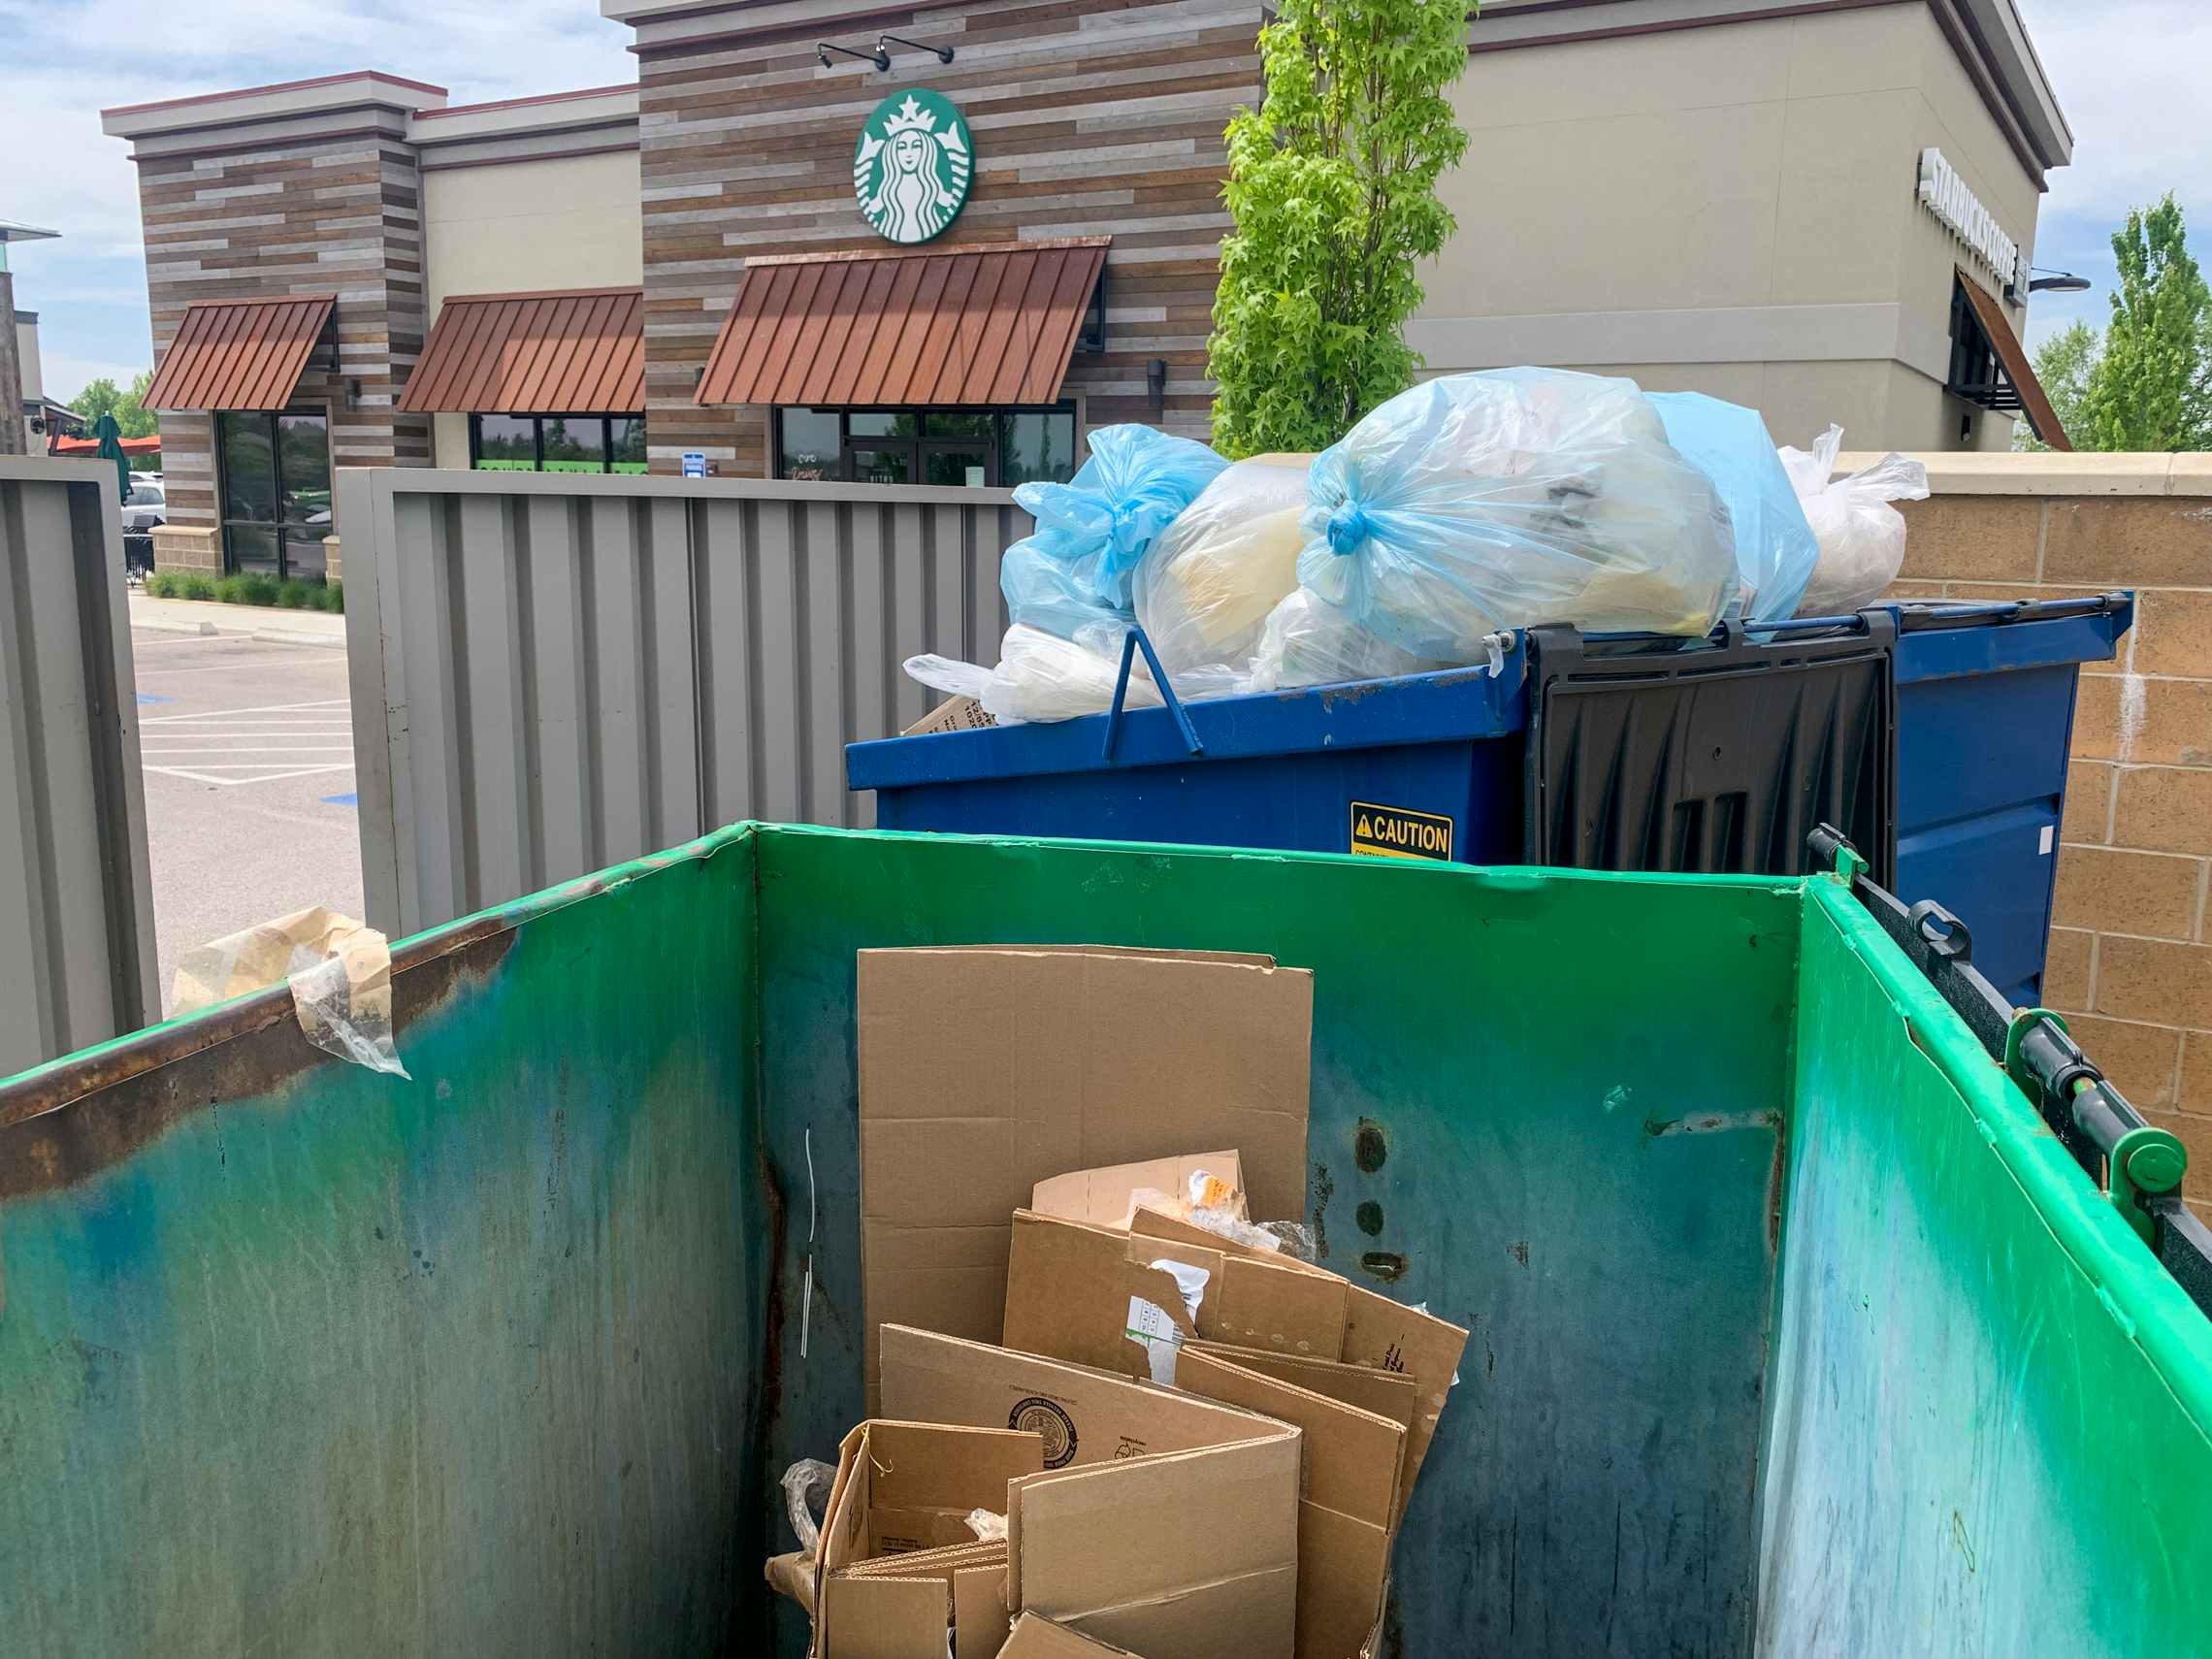 Cardboard boxes in recycle dumpster outside Starbucks.